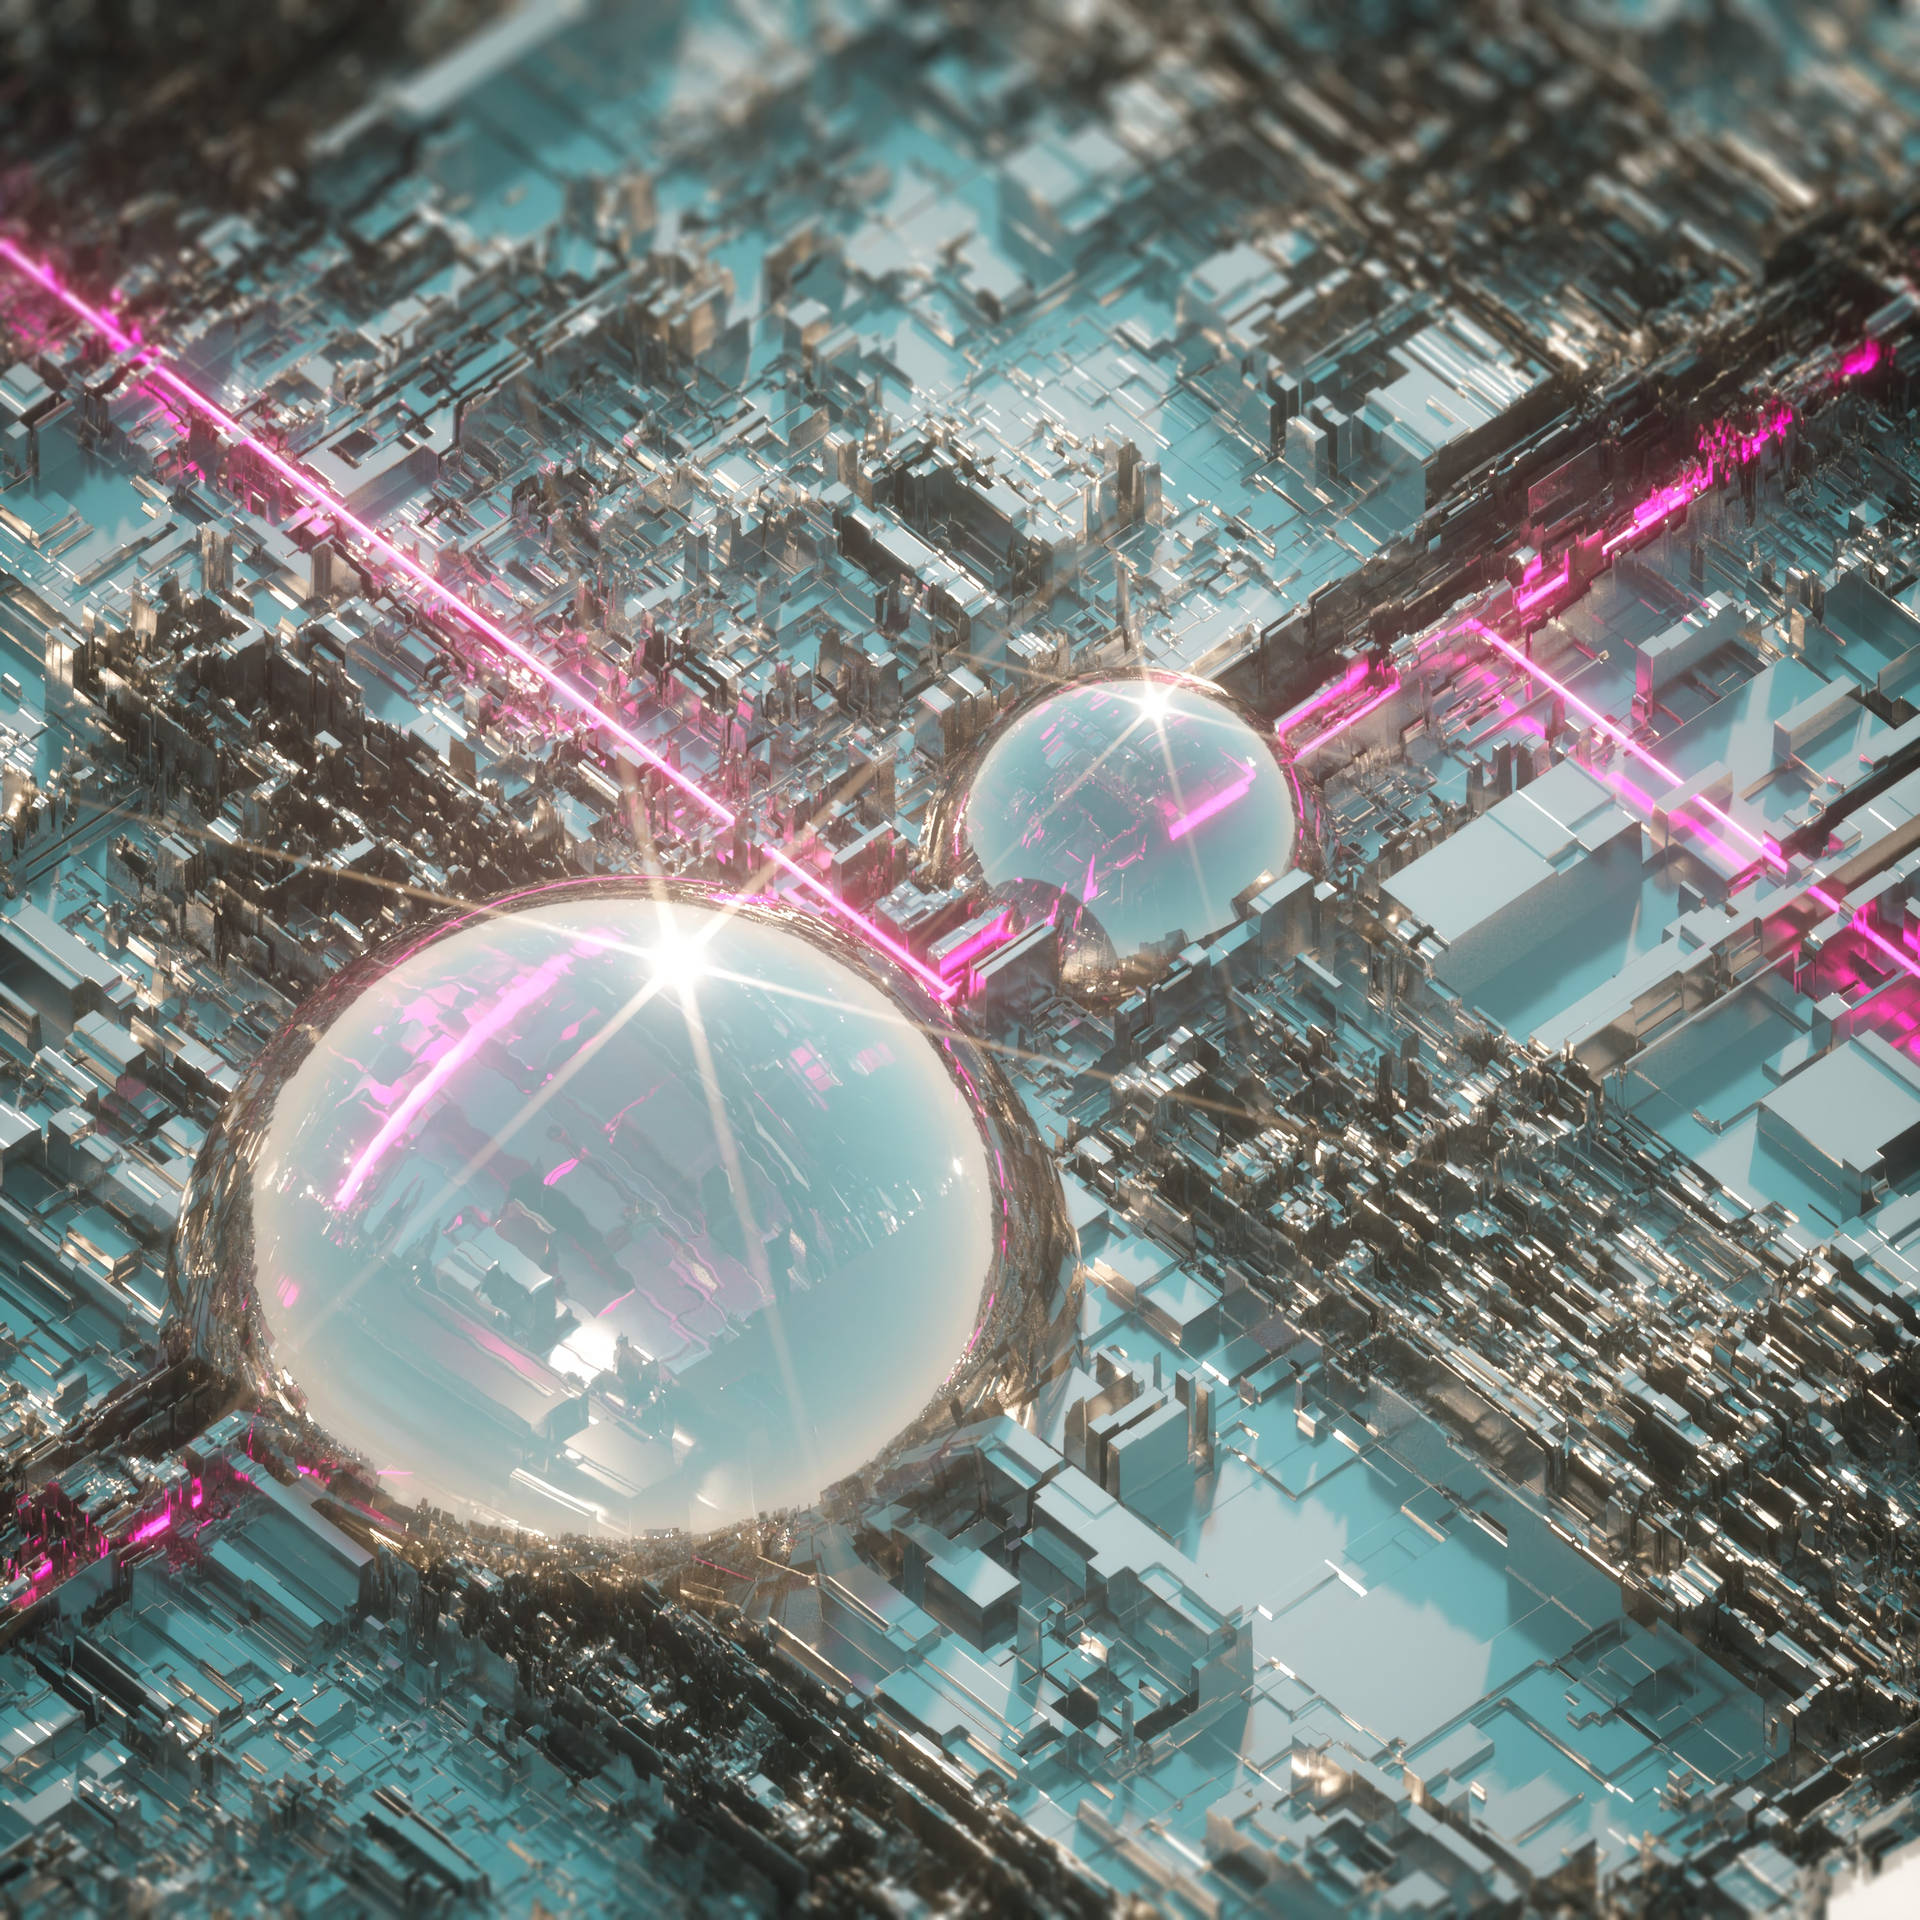 3D elevated view of city with two giant transparent domes wallpaper